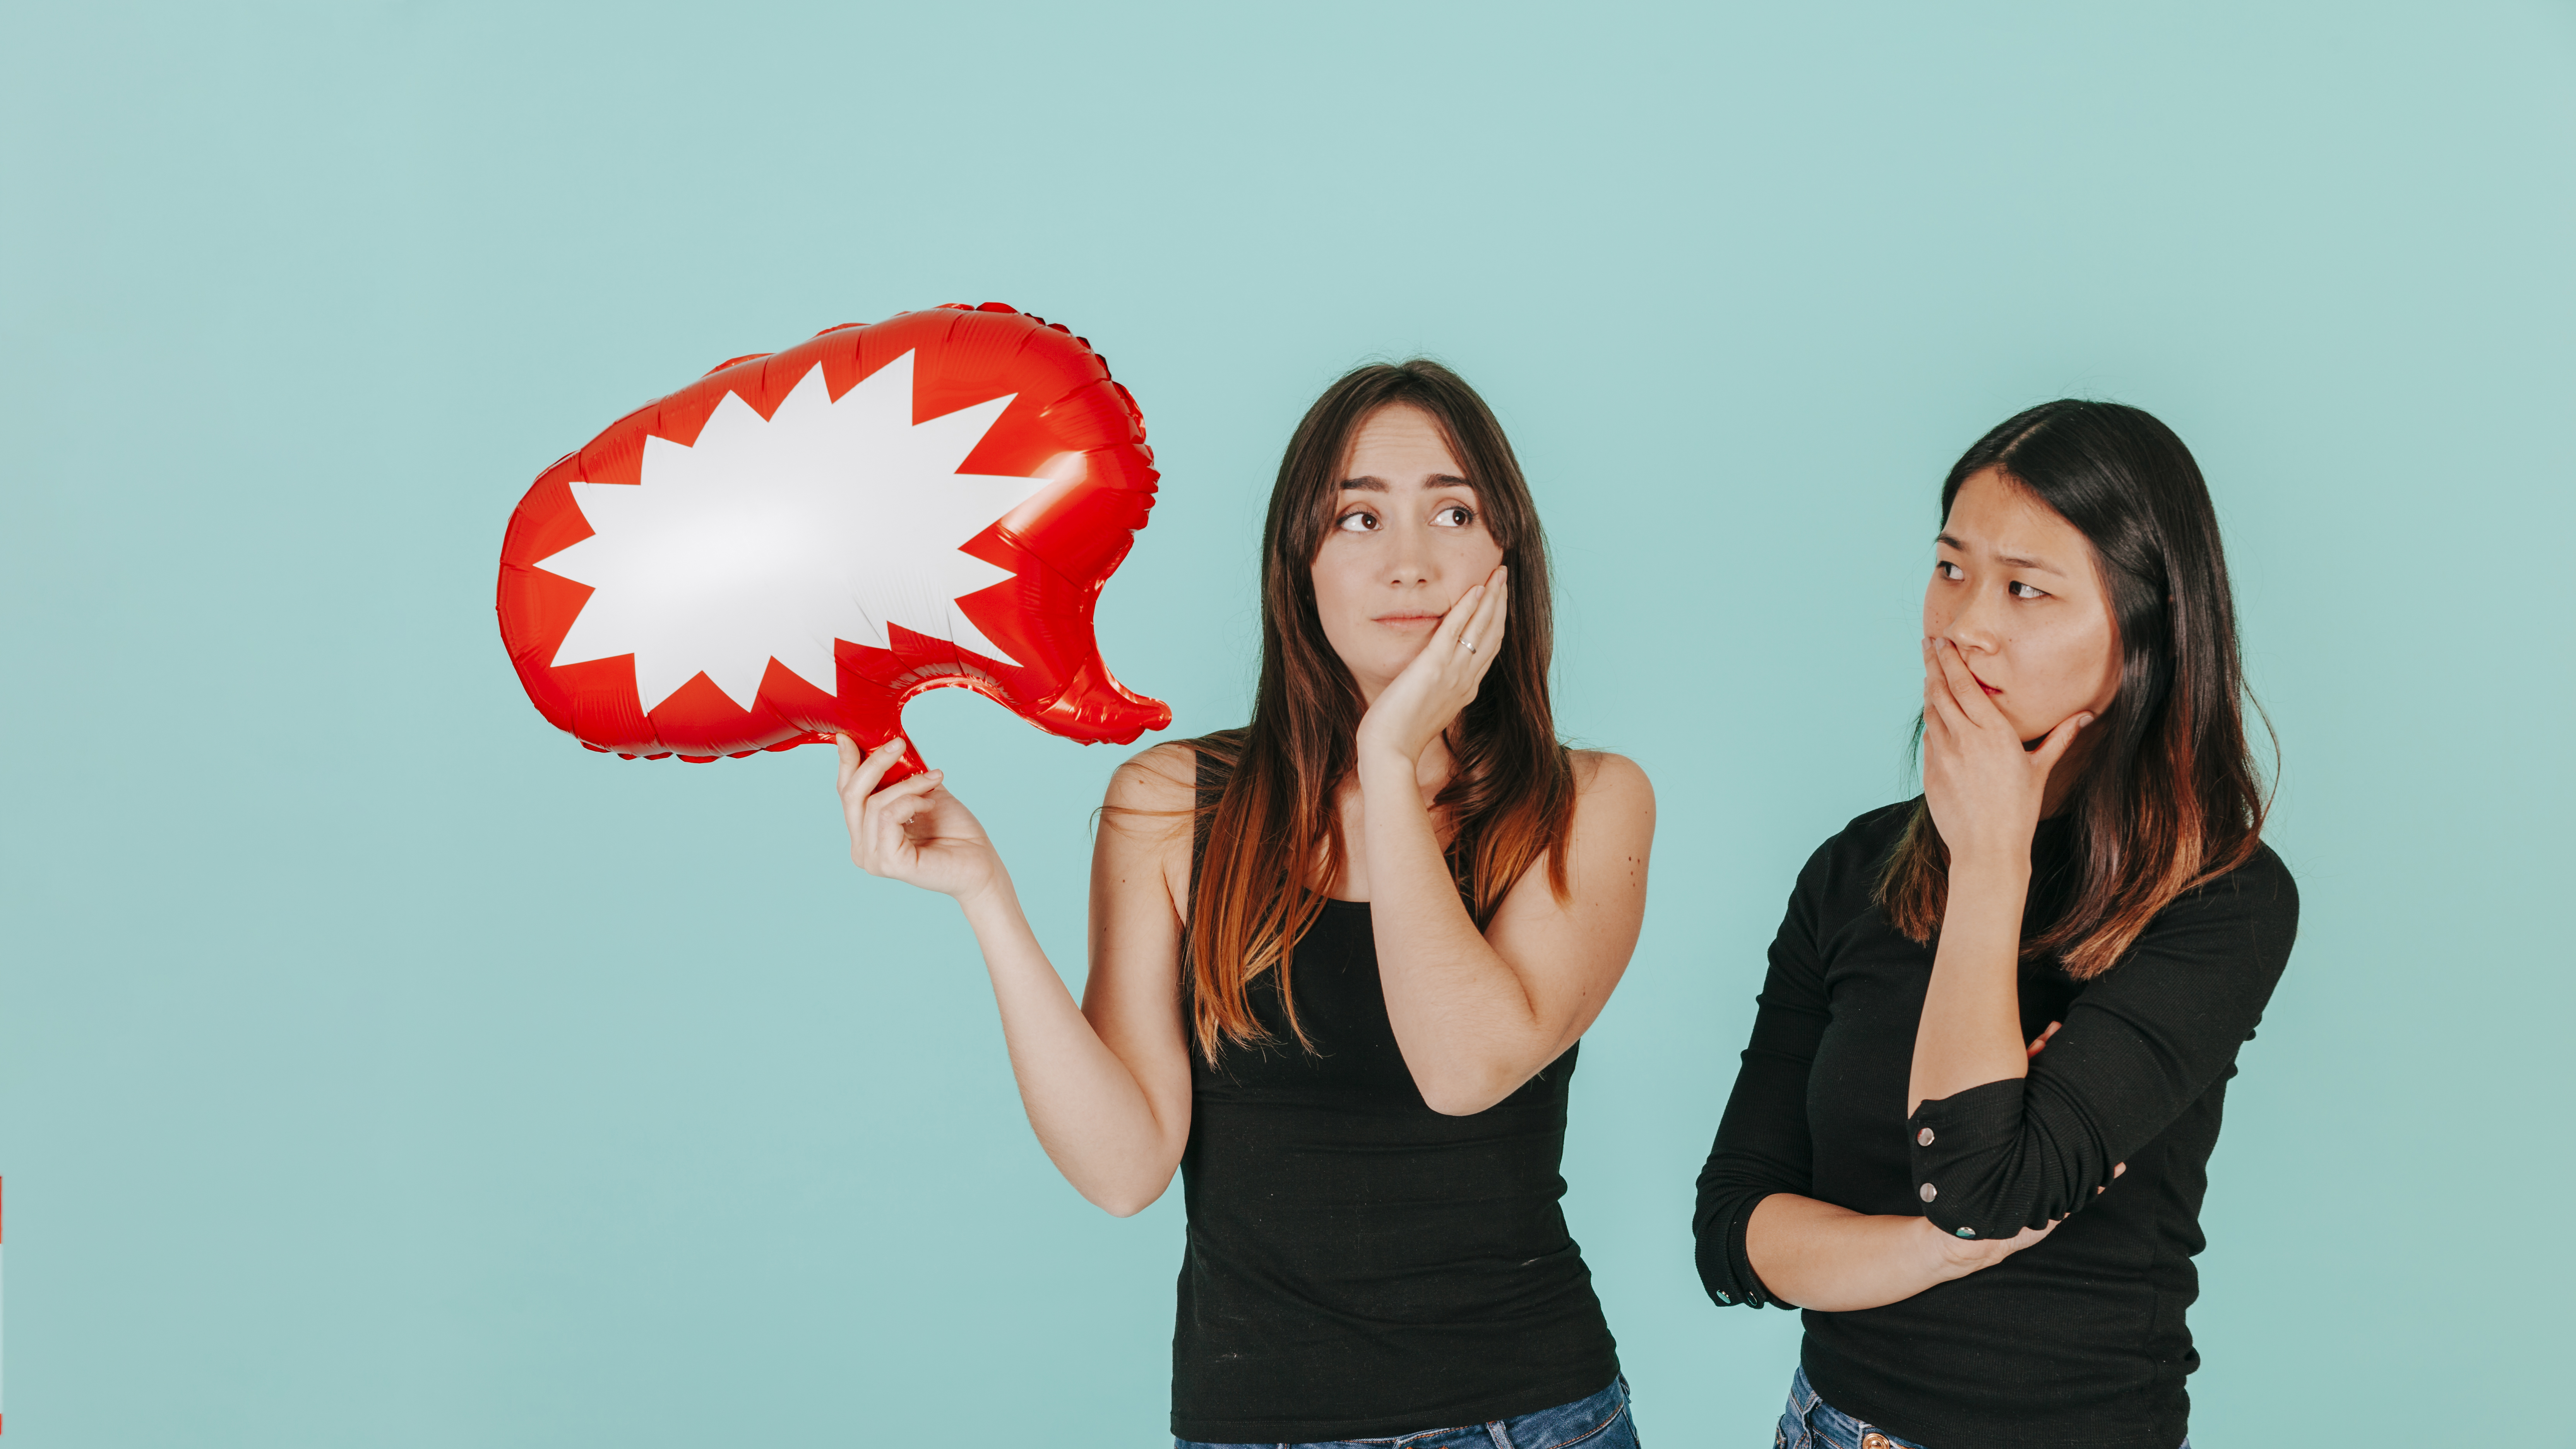 Girl holding red ballon with speech bubble and asian girl looking puzzled 